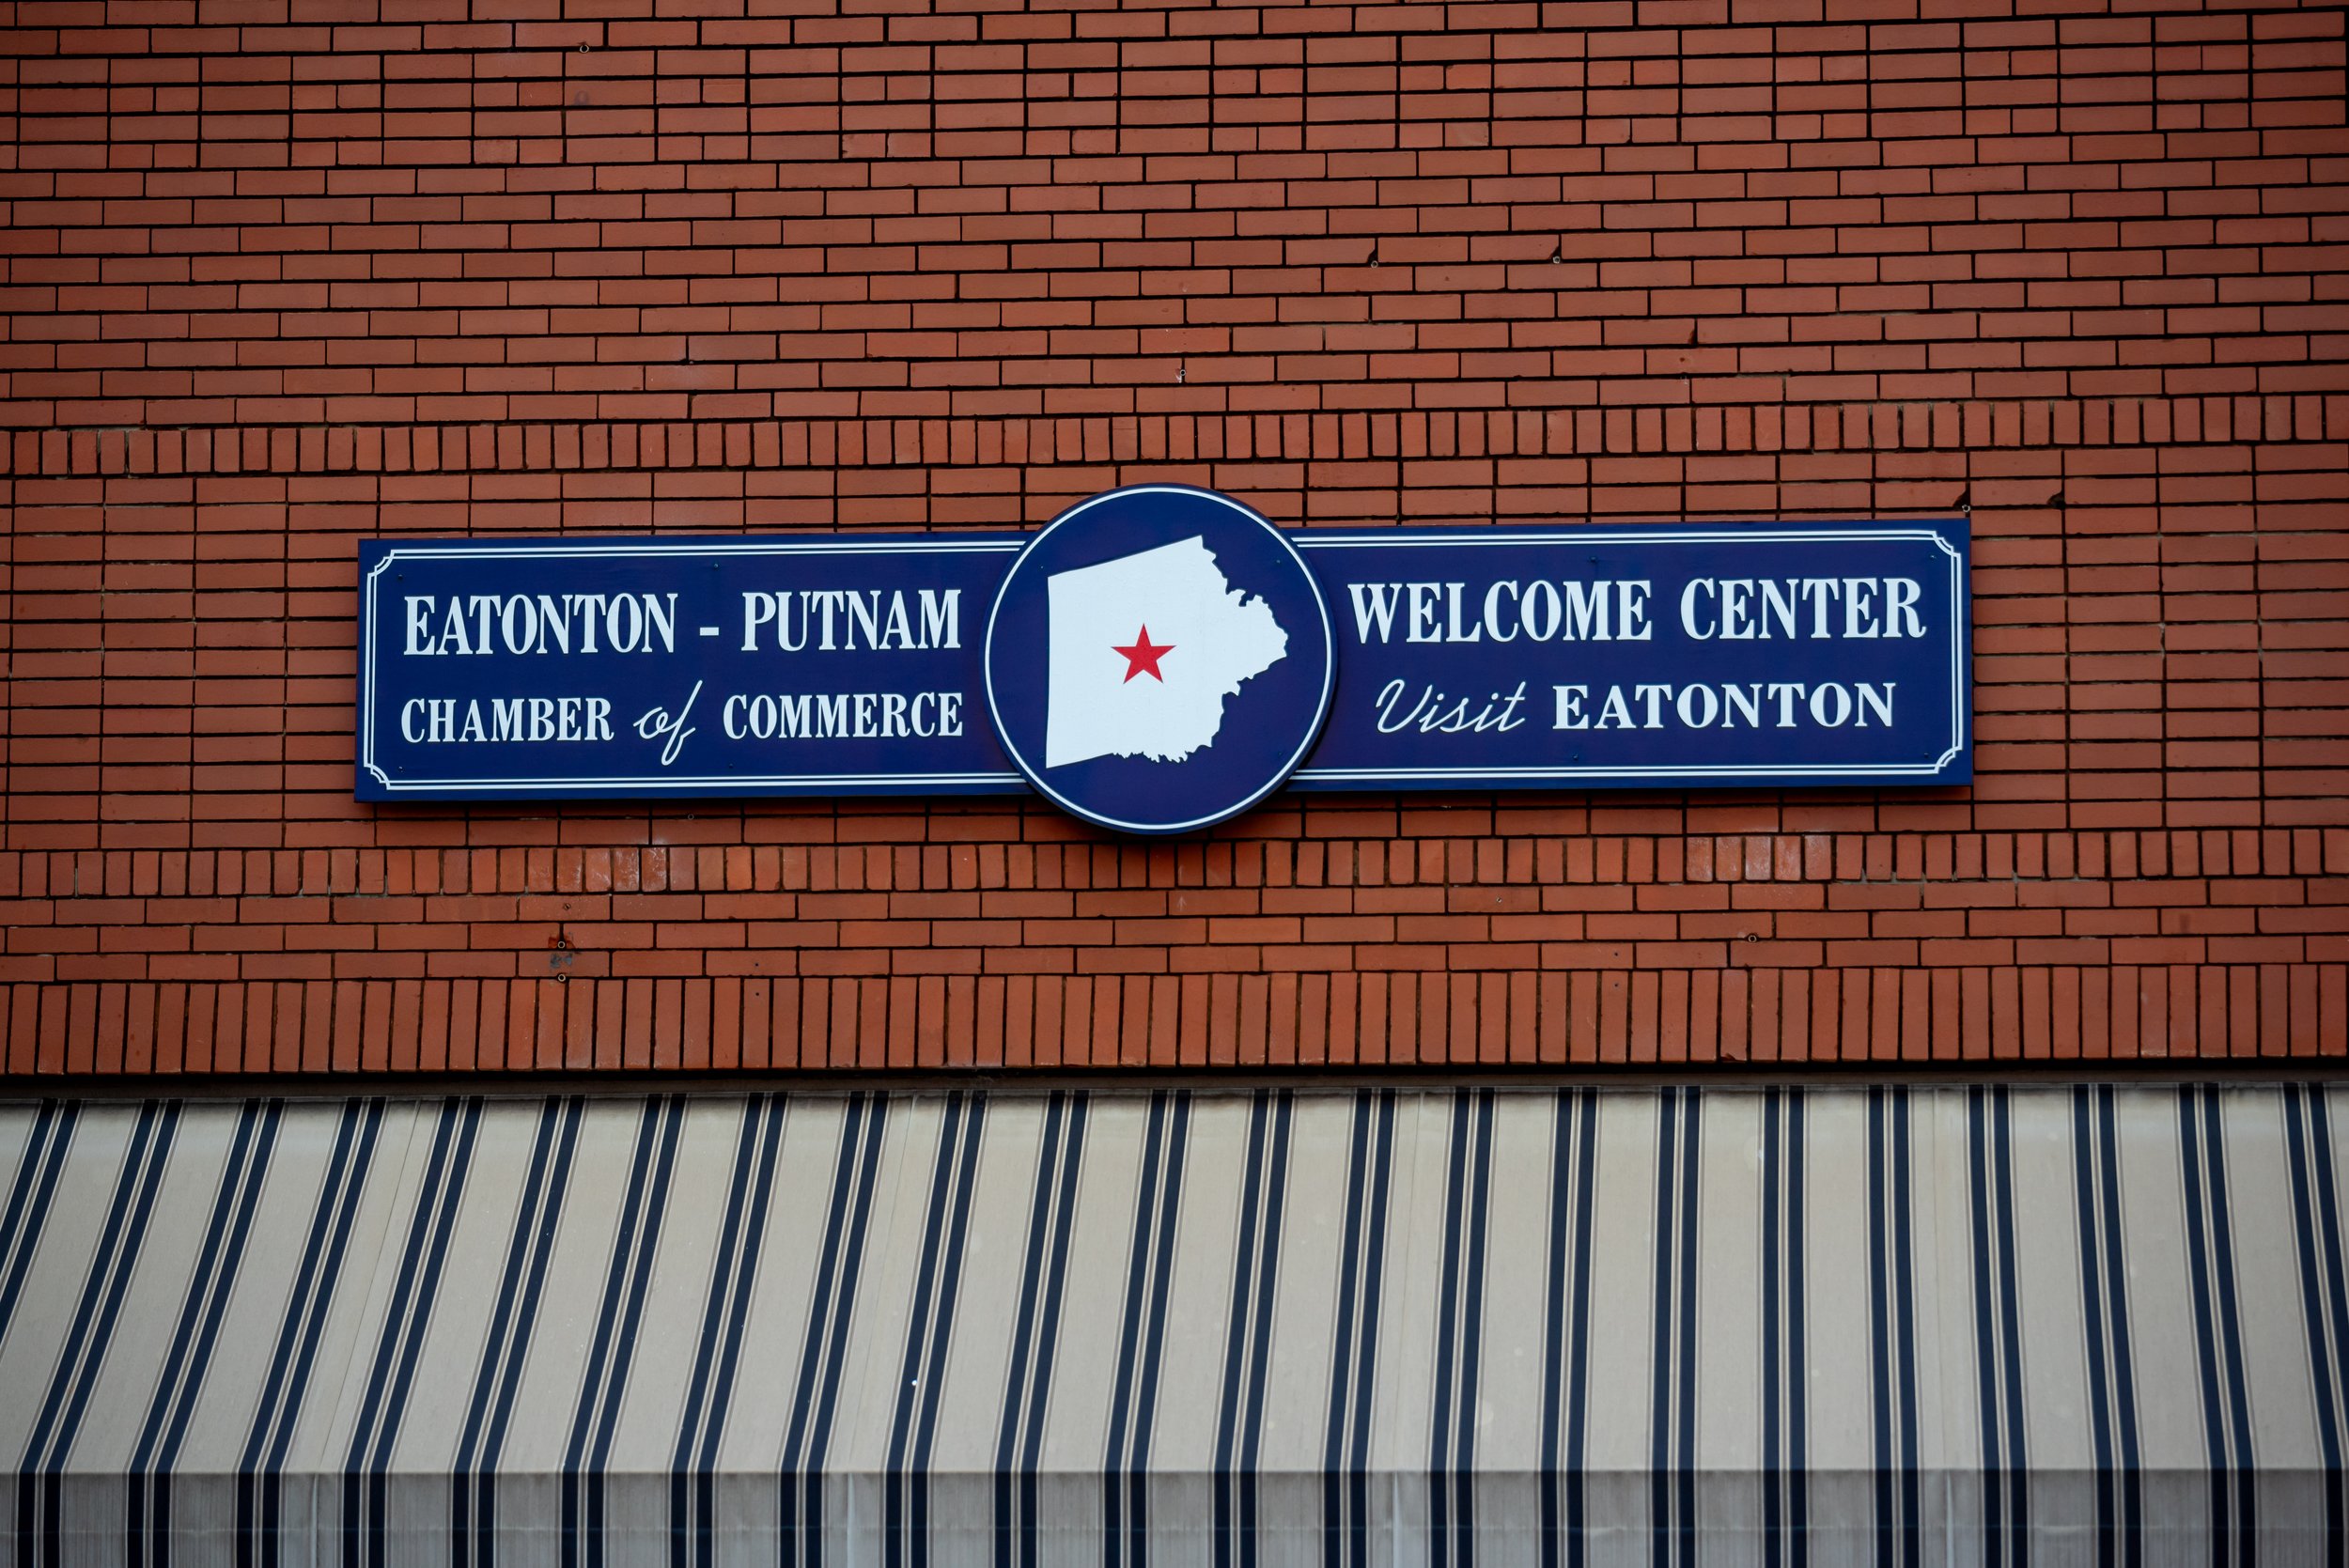 Front Signage of the Eatonton-Putnam Chamber Office